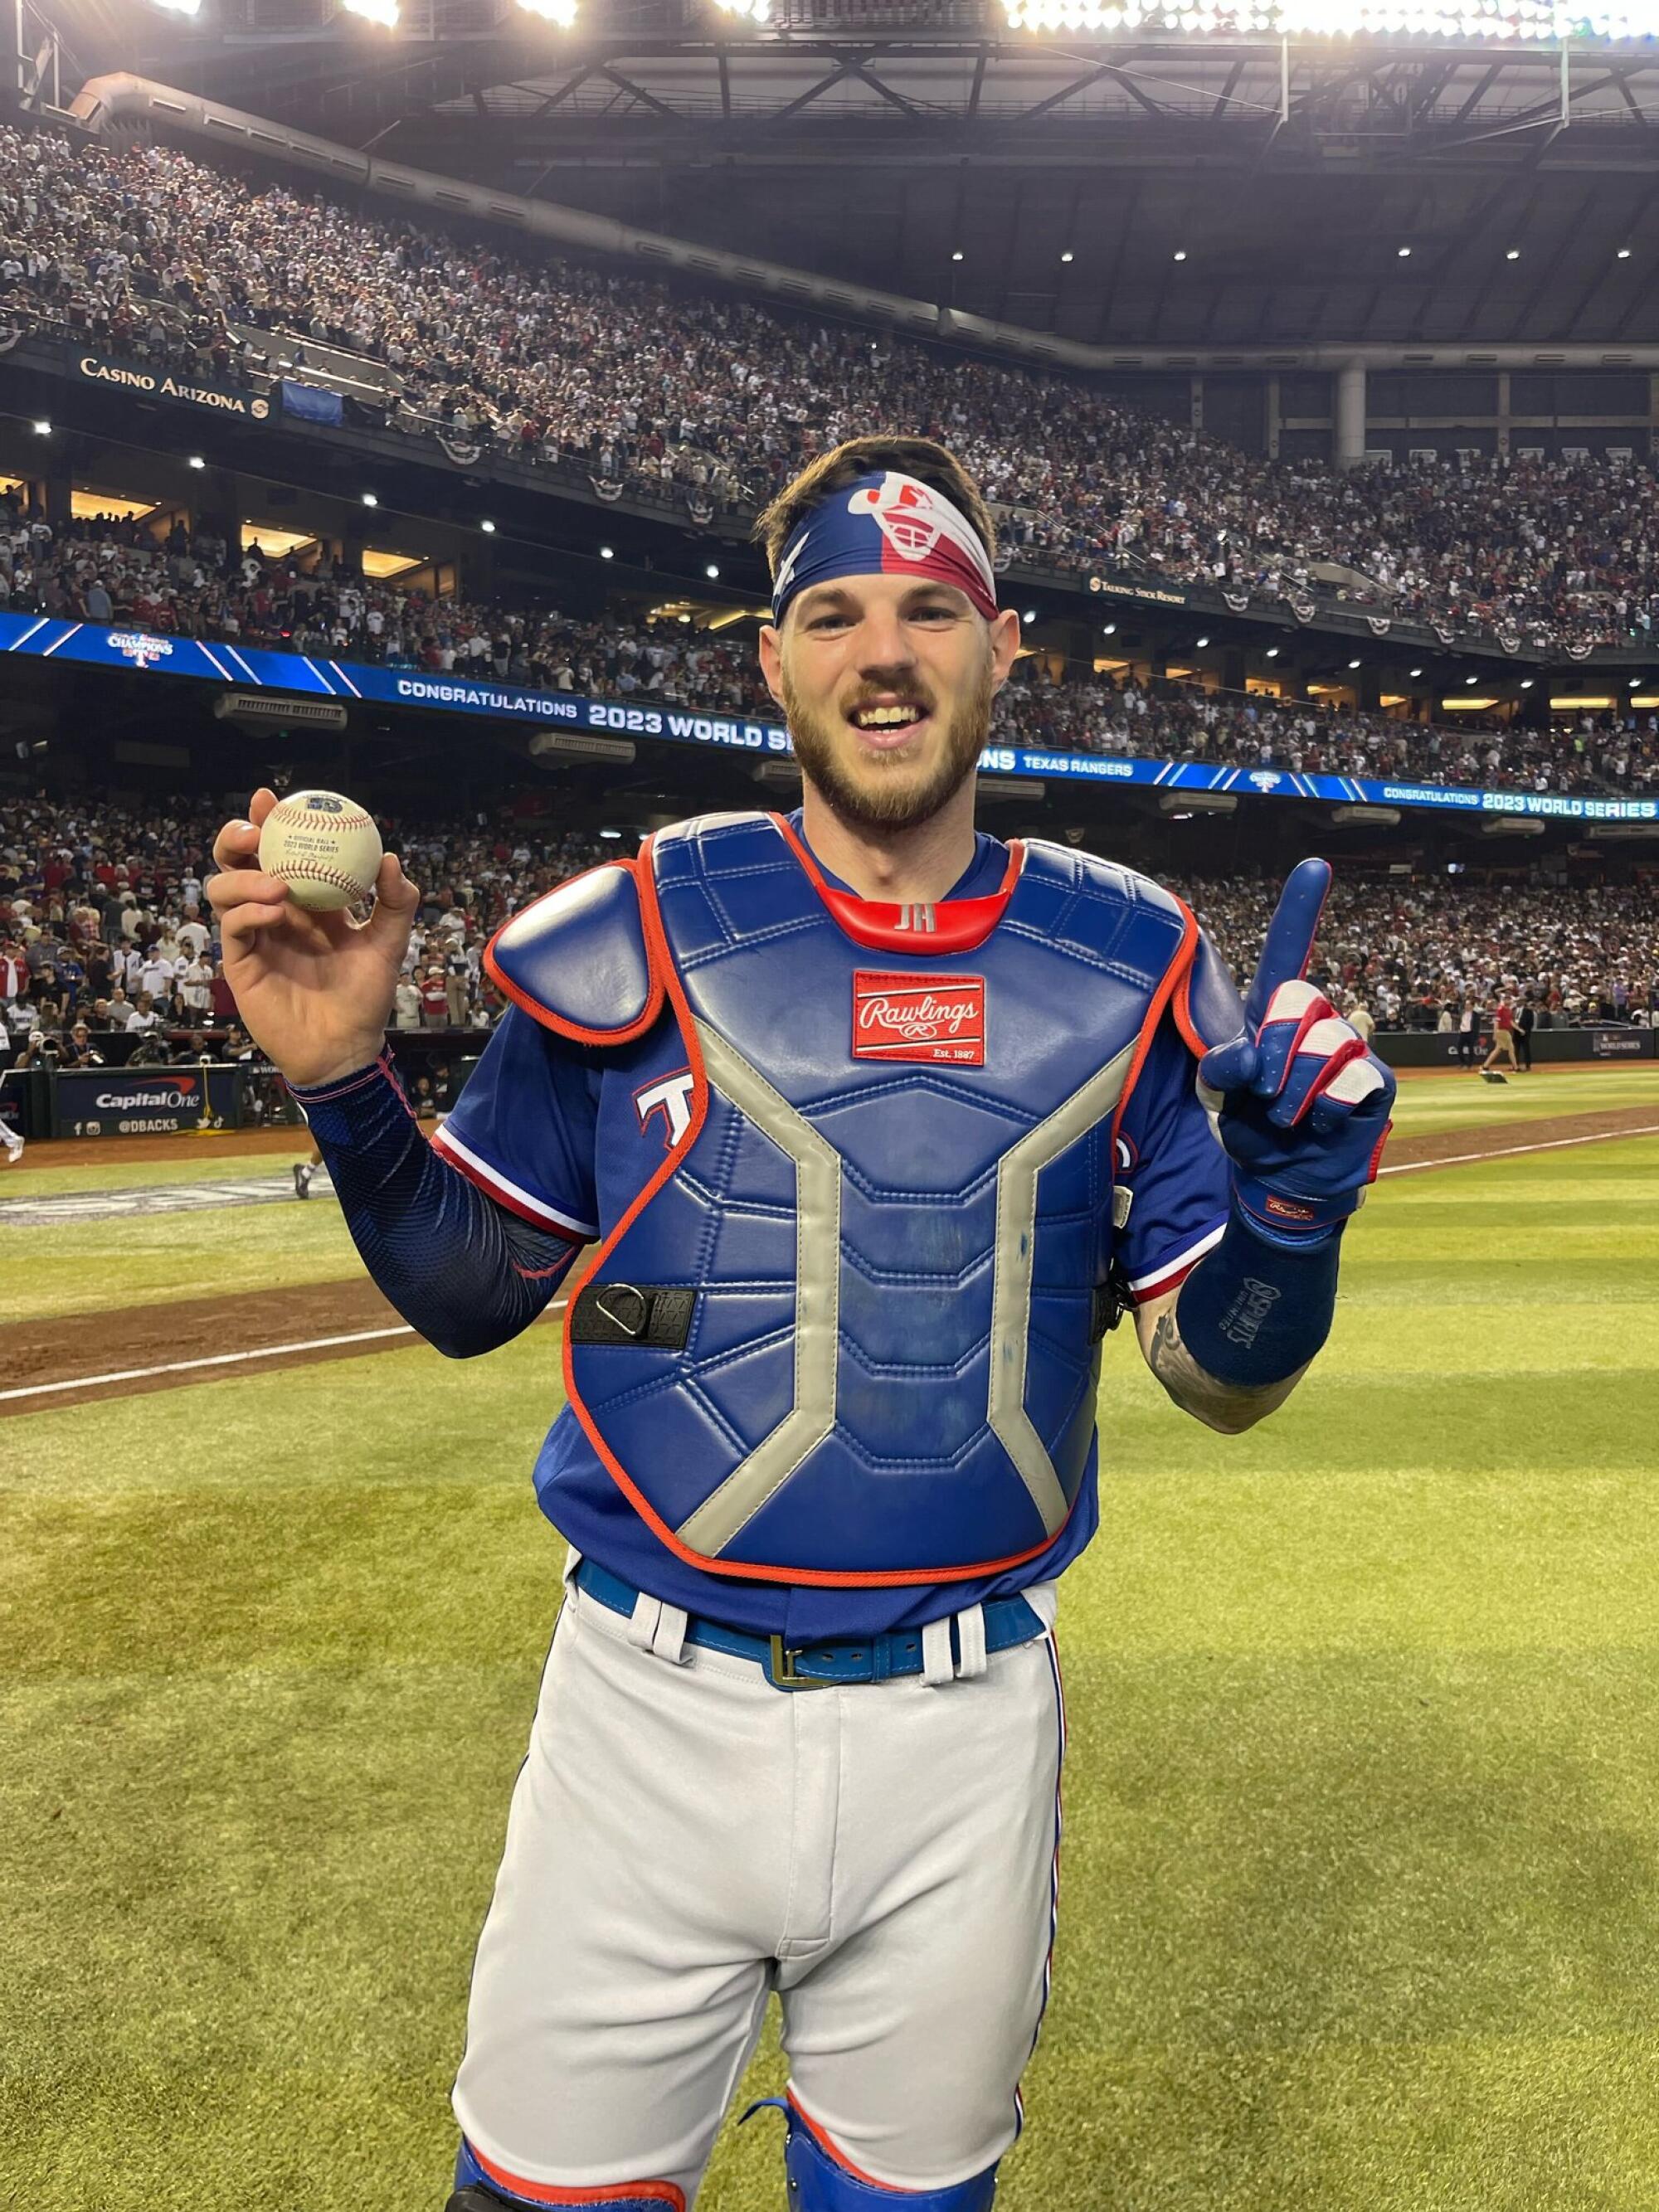 Rangers catcher Jonah Heim with the authenticated baseball that was the last out of the 2023 World Series. 